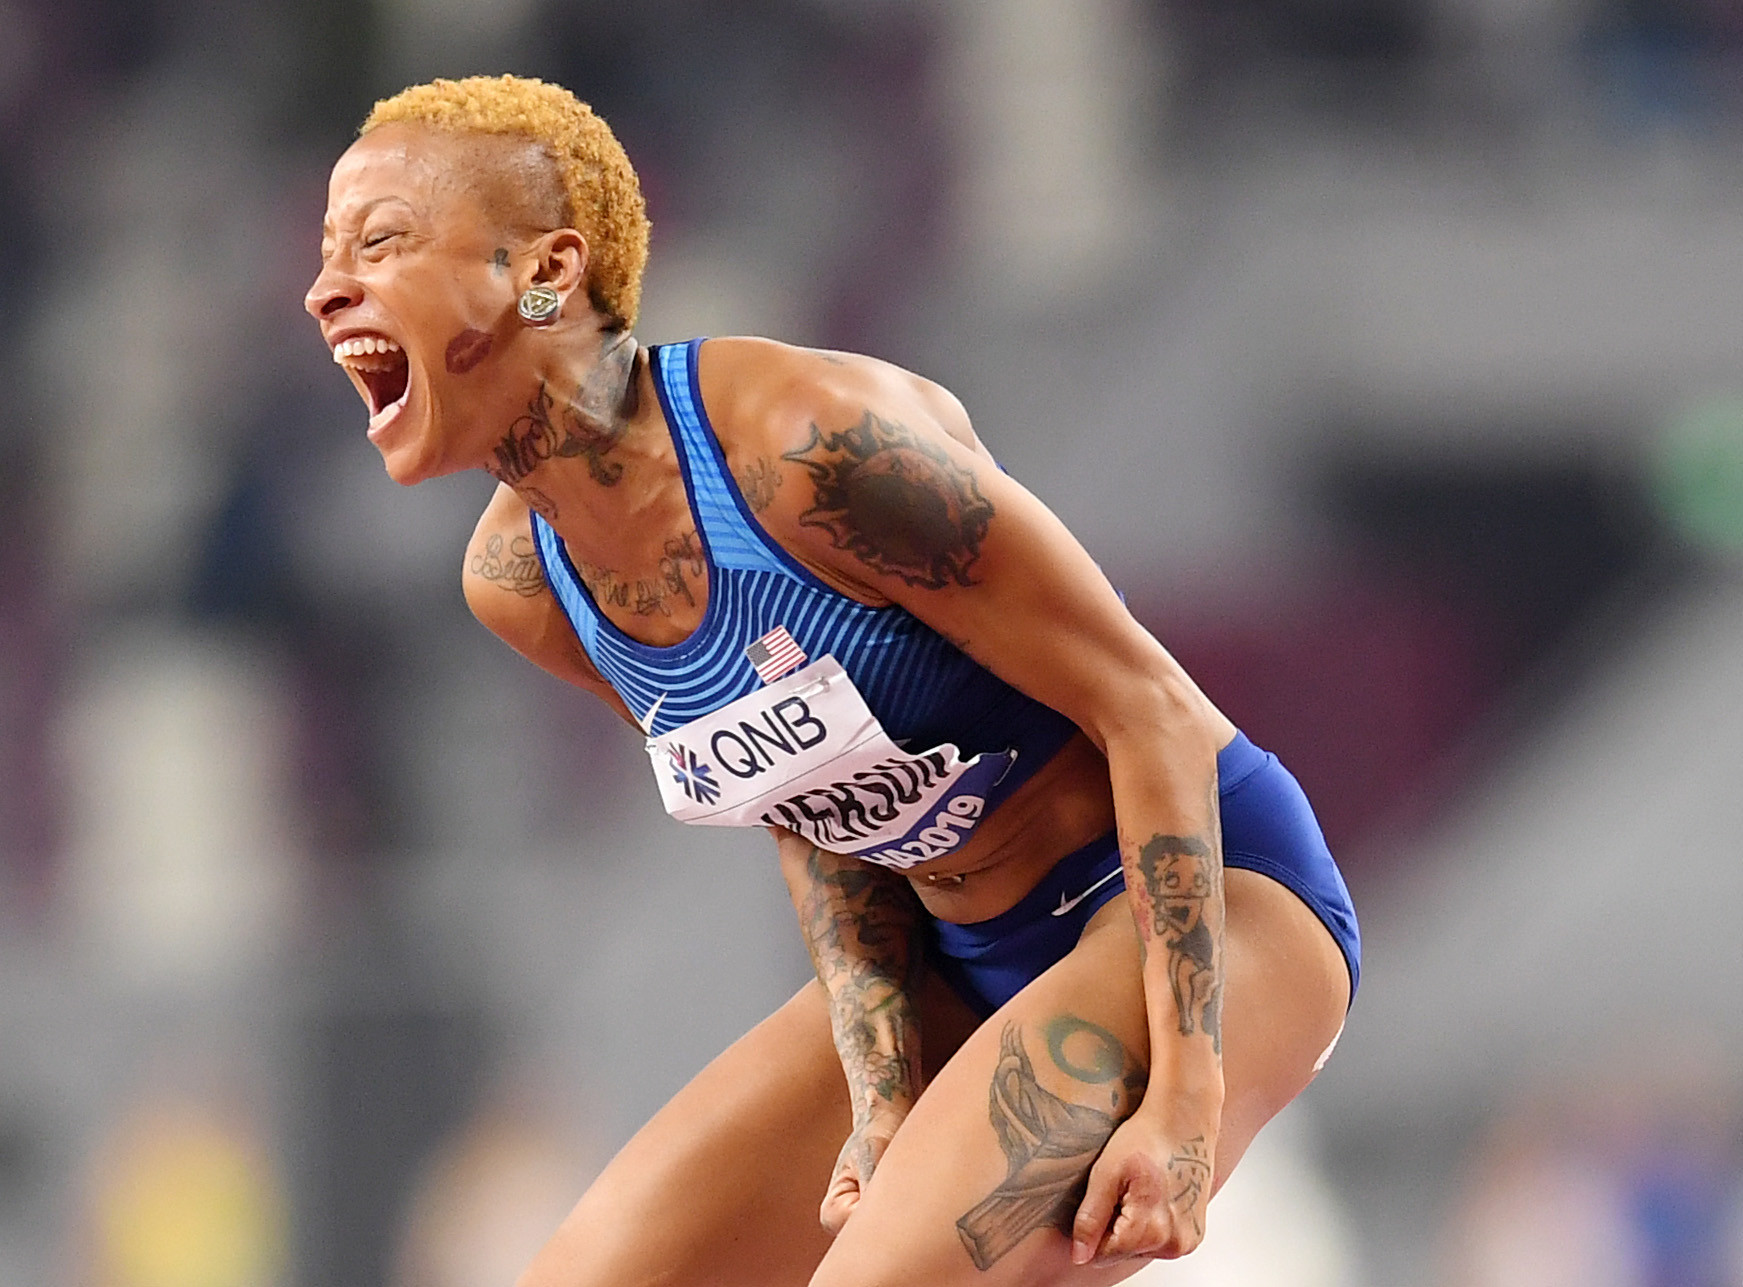 Inika McPherson had her latest suspension reduced from two years to 16 months after claiming she mistakenly took the prohibited substance ©Getty Images